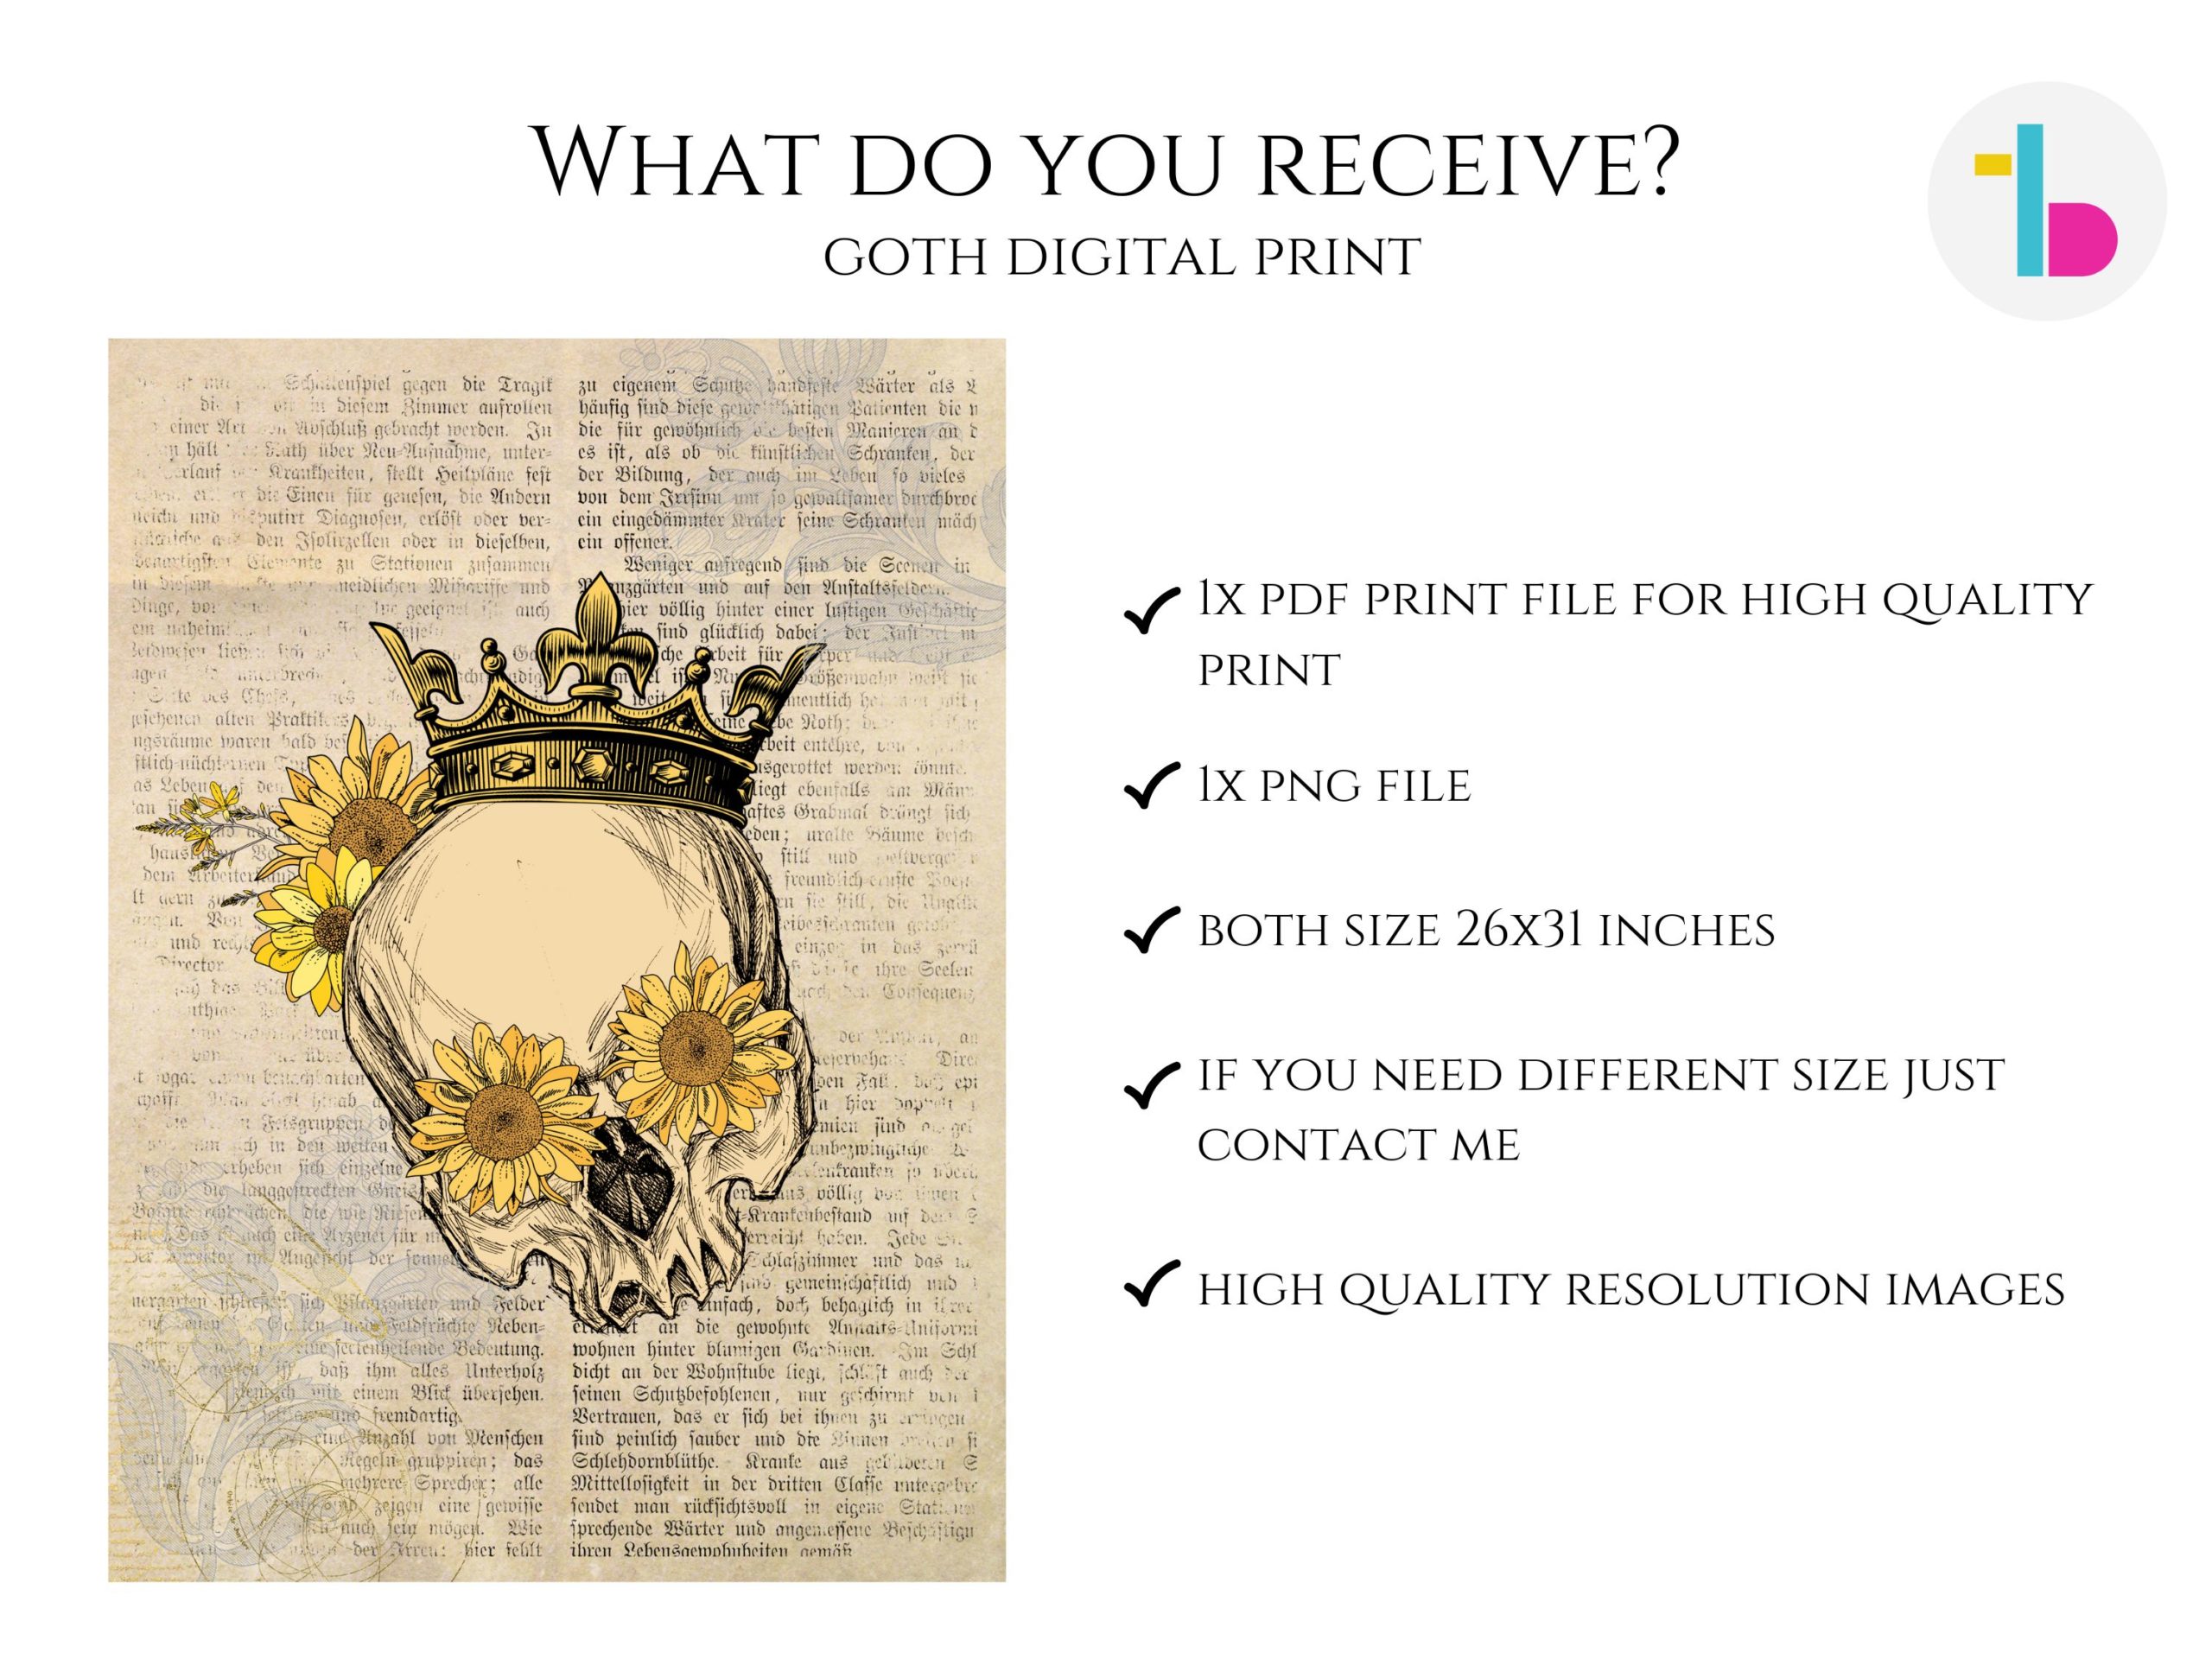 Goth human skull with sunflowers and crown digital print